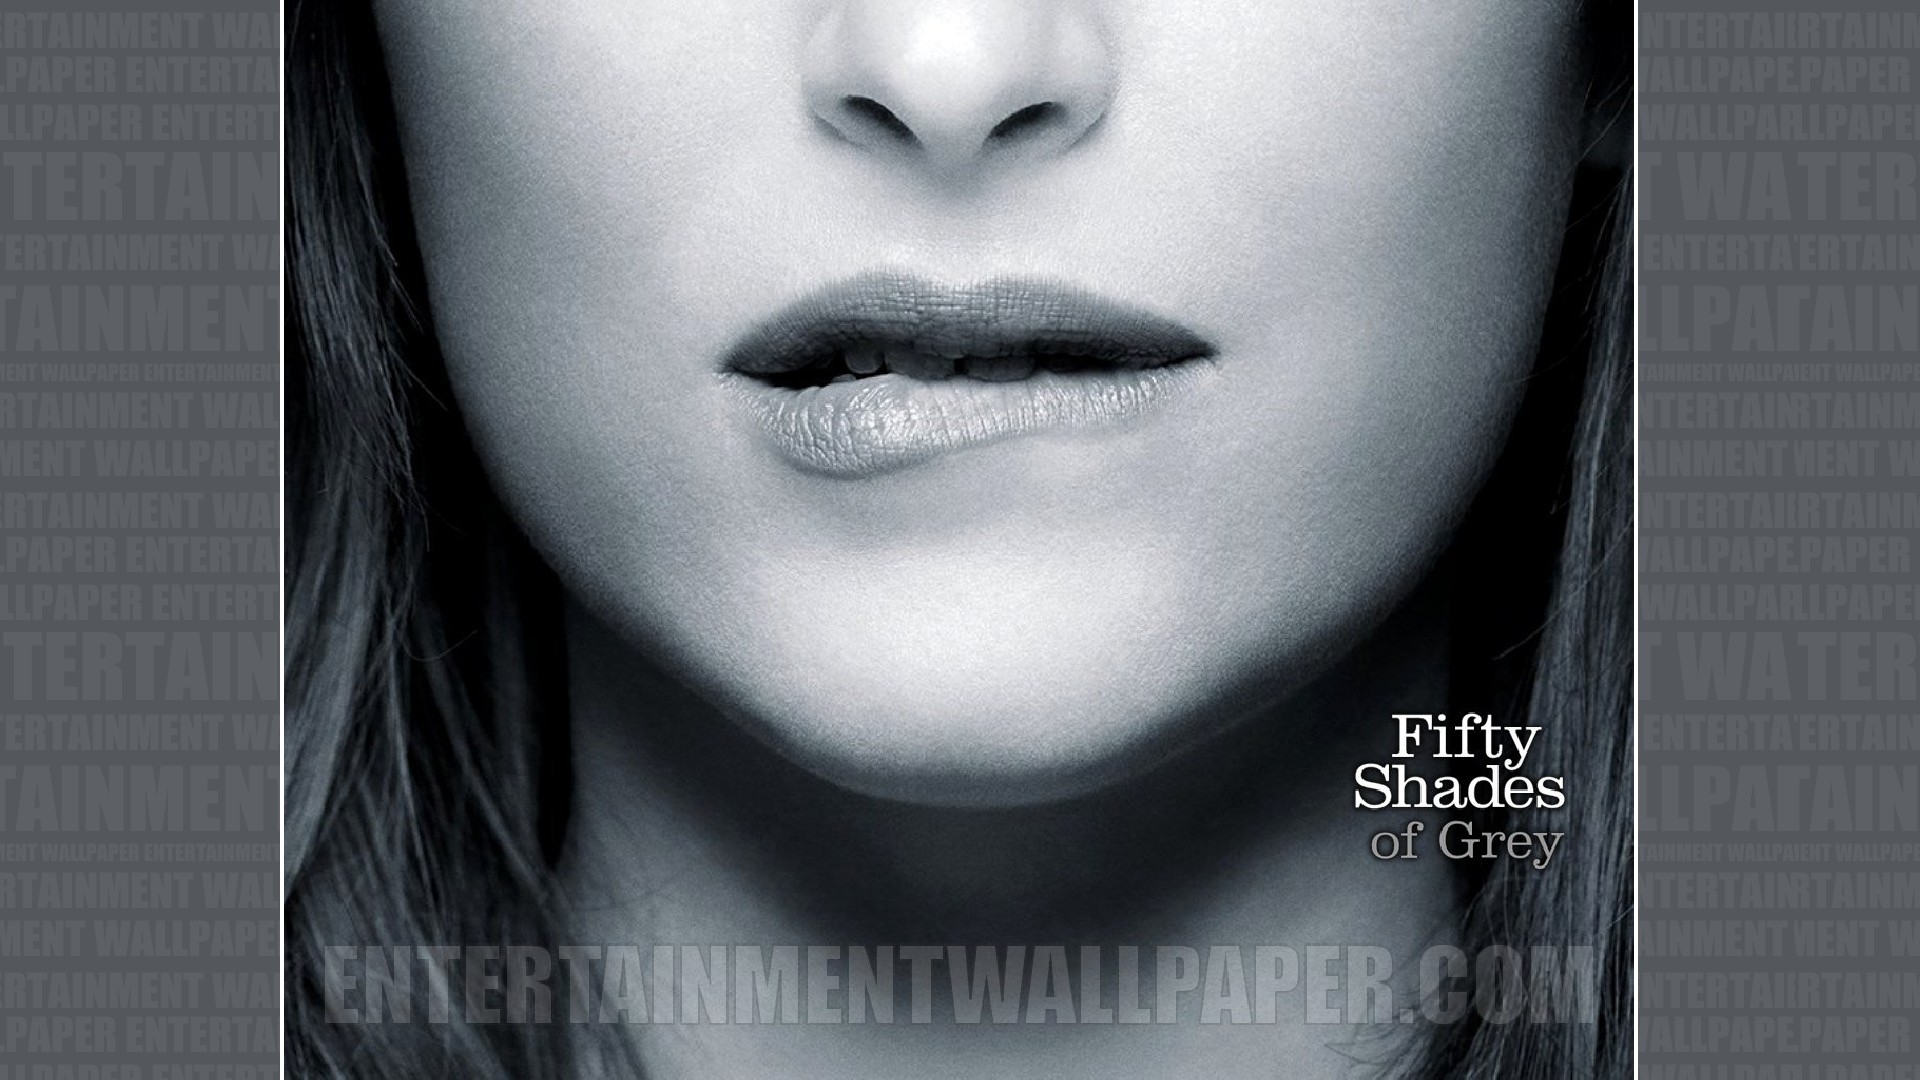 Fifty Shades of Grey Wallpaper – Original size, download now